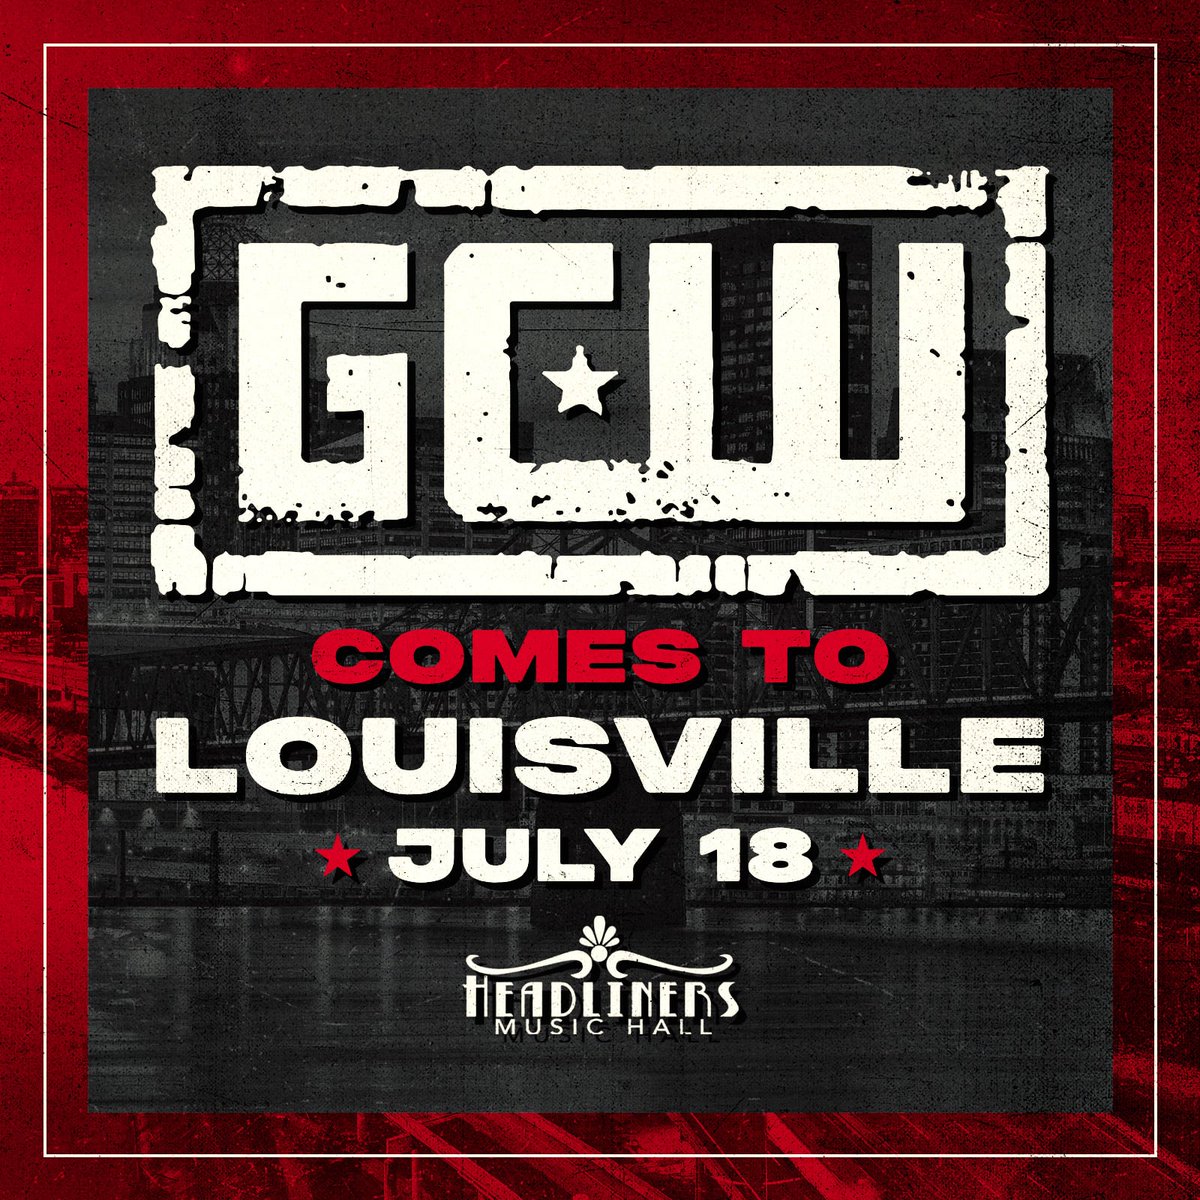 *SAVE THE DATE* GCW comes to LOUISVILLE Kentucky for the first time on Thursday, July 18th! Tickets on Sale this Friday at Noon GCW in Louisville Thurs 7/18 - 730PM Headliners Music Hall Louisville KY Watch LIVE on @FiteTV+